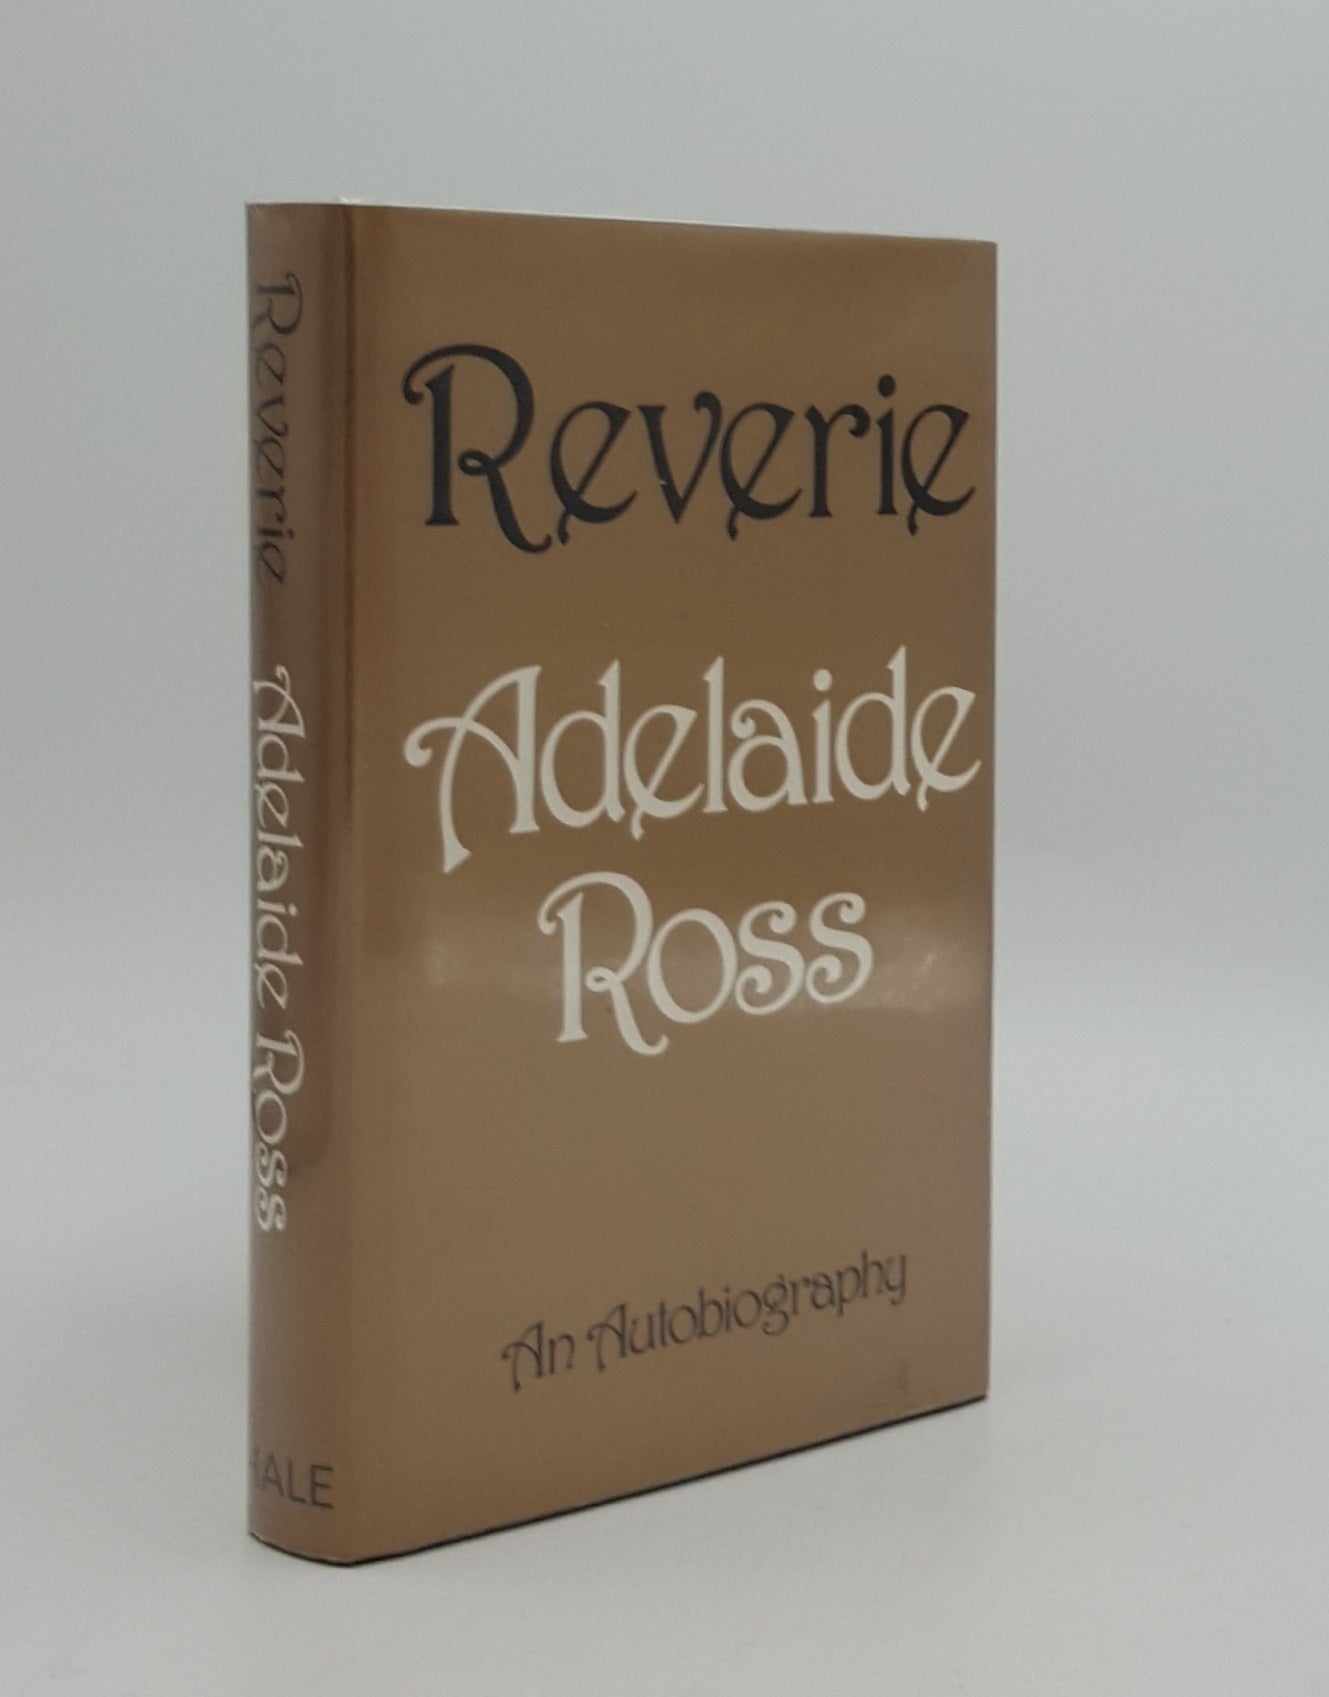 ROSS Adelaide - Reverie an Autobiography